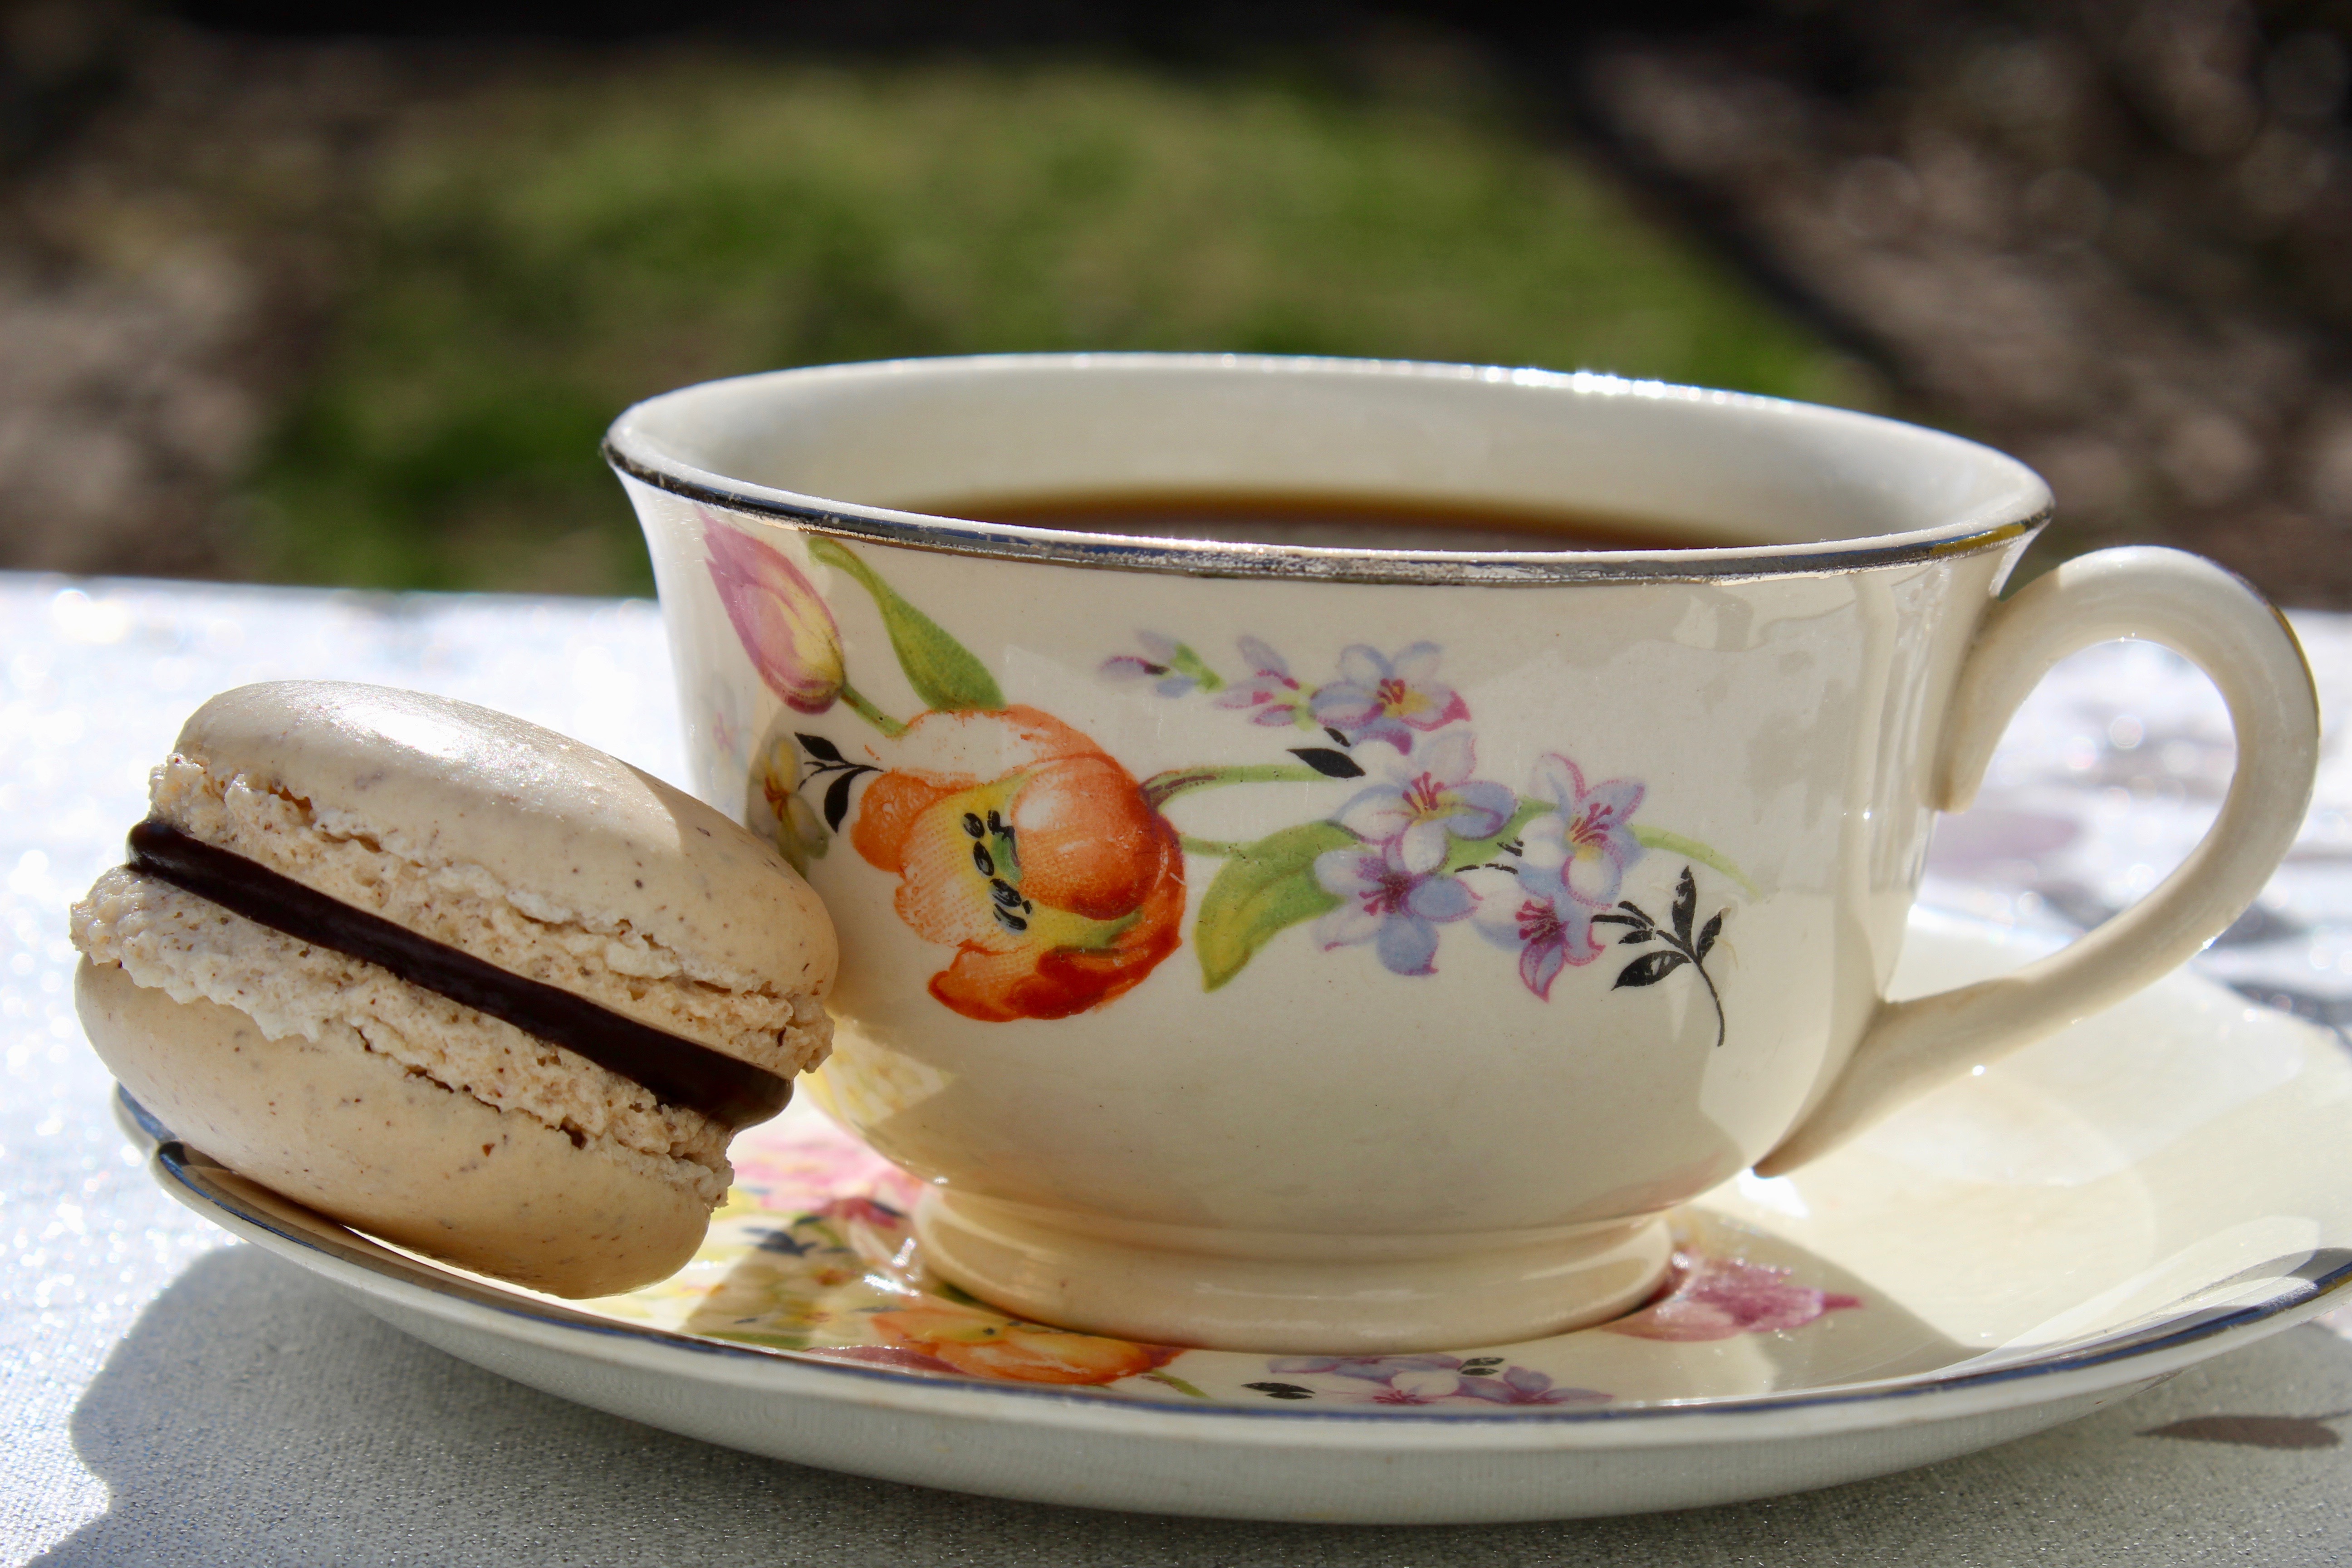 A macaron turns a simple cup of coffee into a special treat!